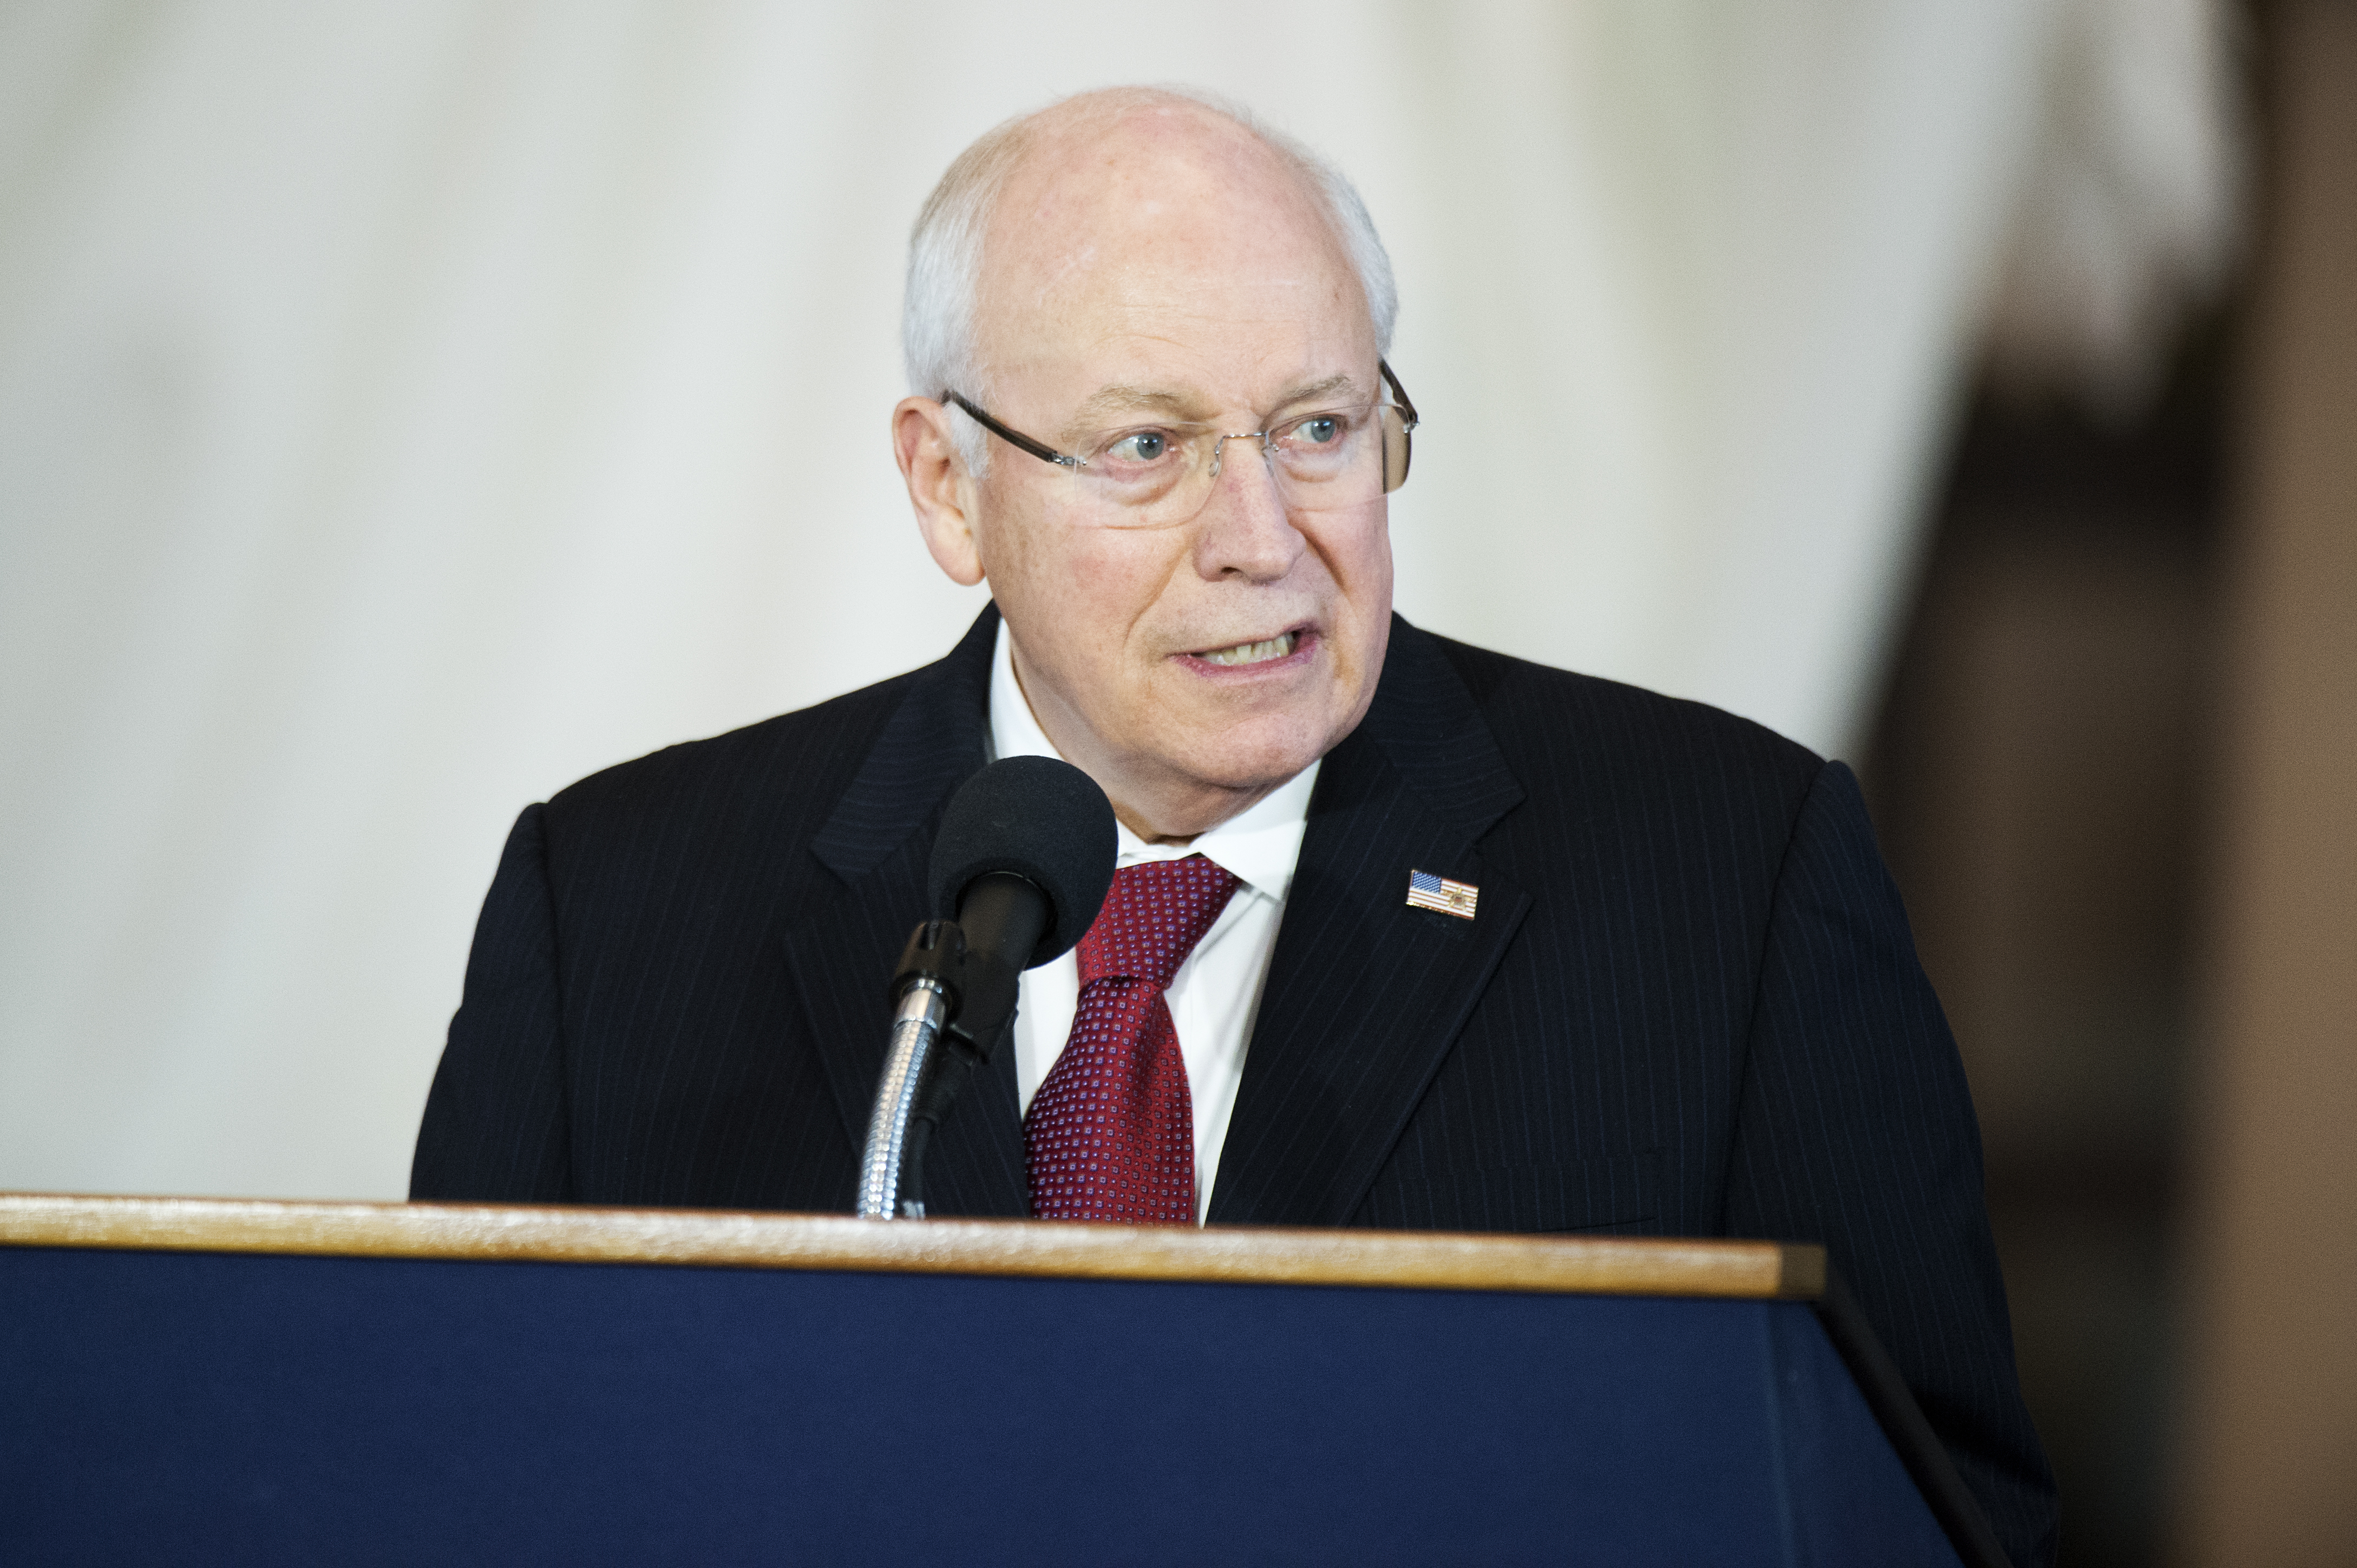 Former Vice President Dick Cheney makes remarks during a bust unveiling ceremony for him in the Capitol Visitor Center's Emancipation Hall on Dec. 3, 2015. (Tom Williams—AP)